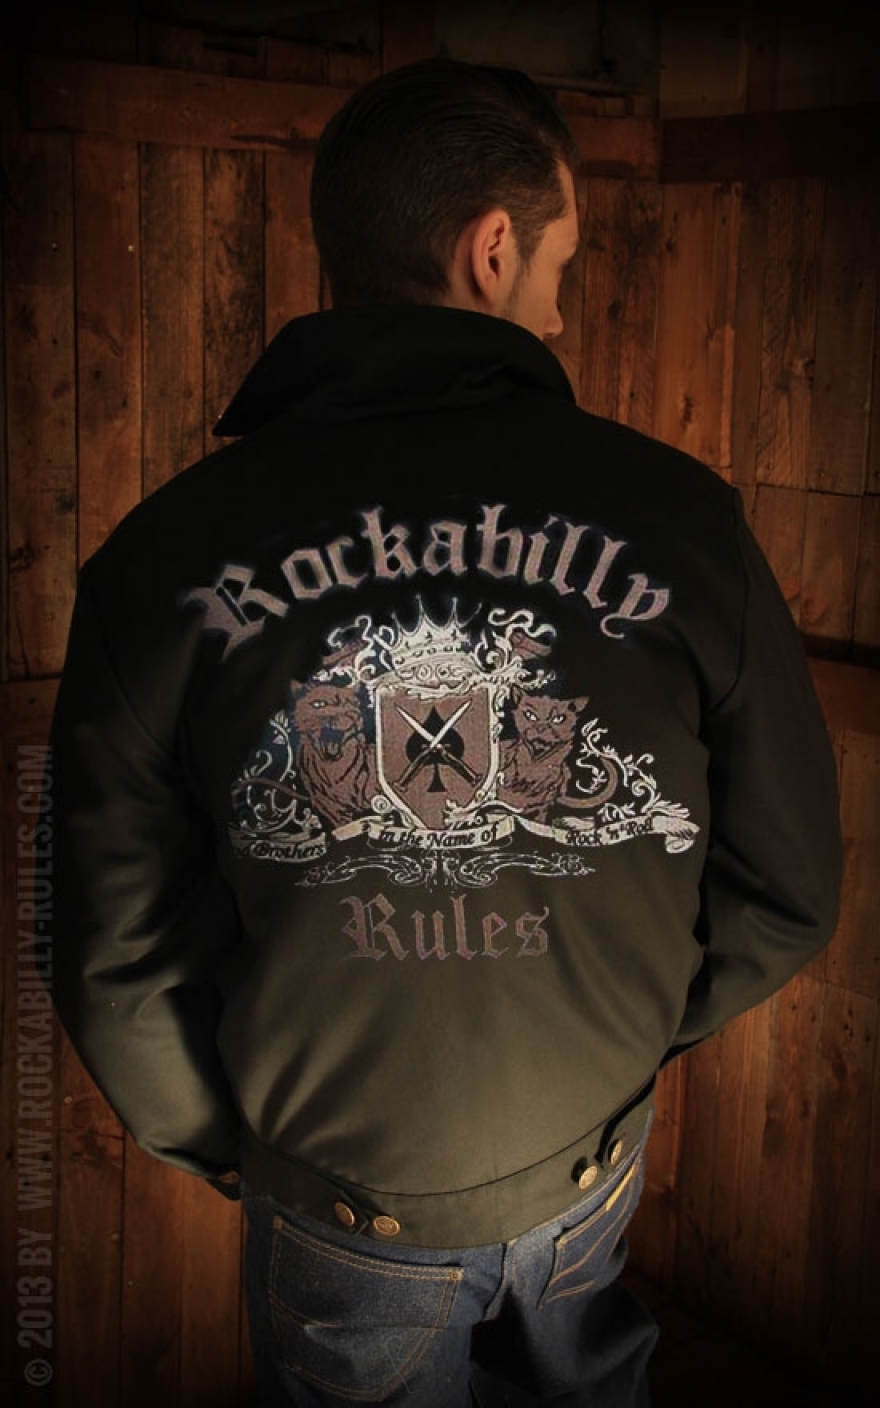 Casual Worker Jacket Rockabilly Rules from the Rumble59 Collection